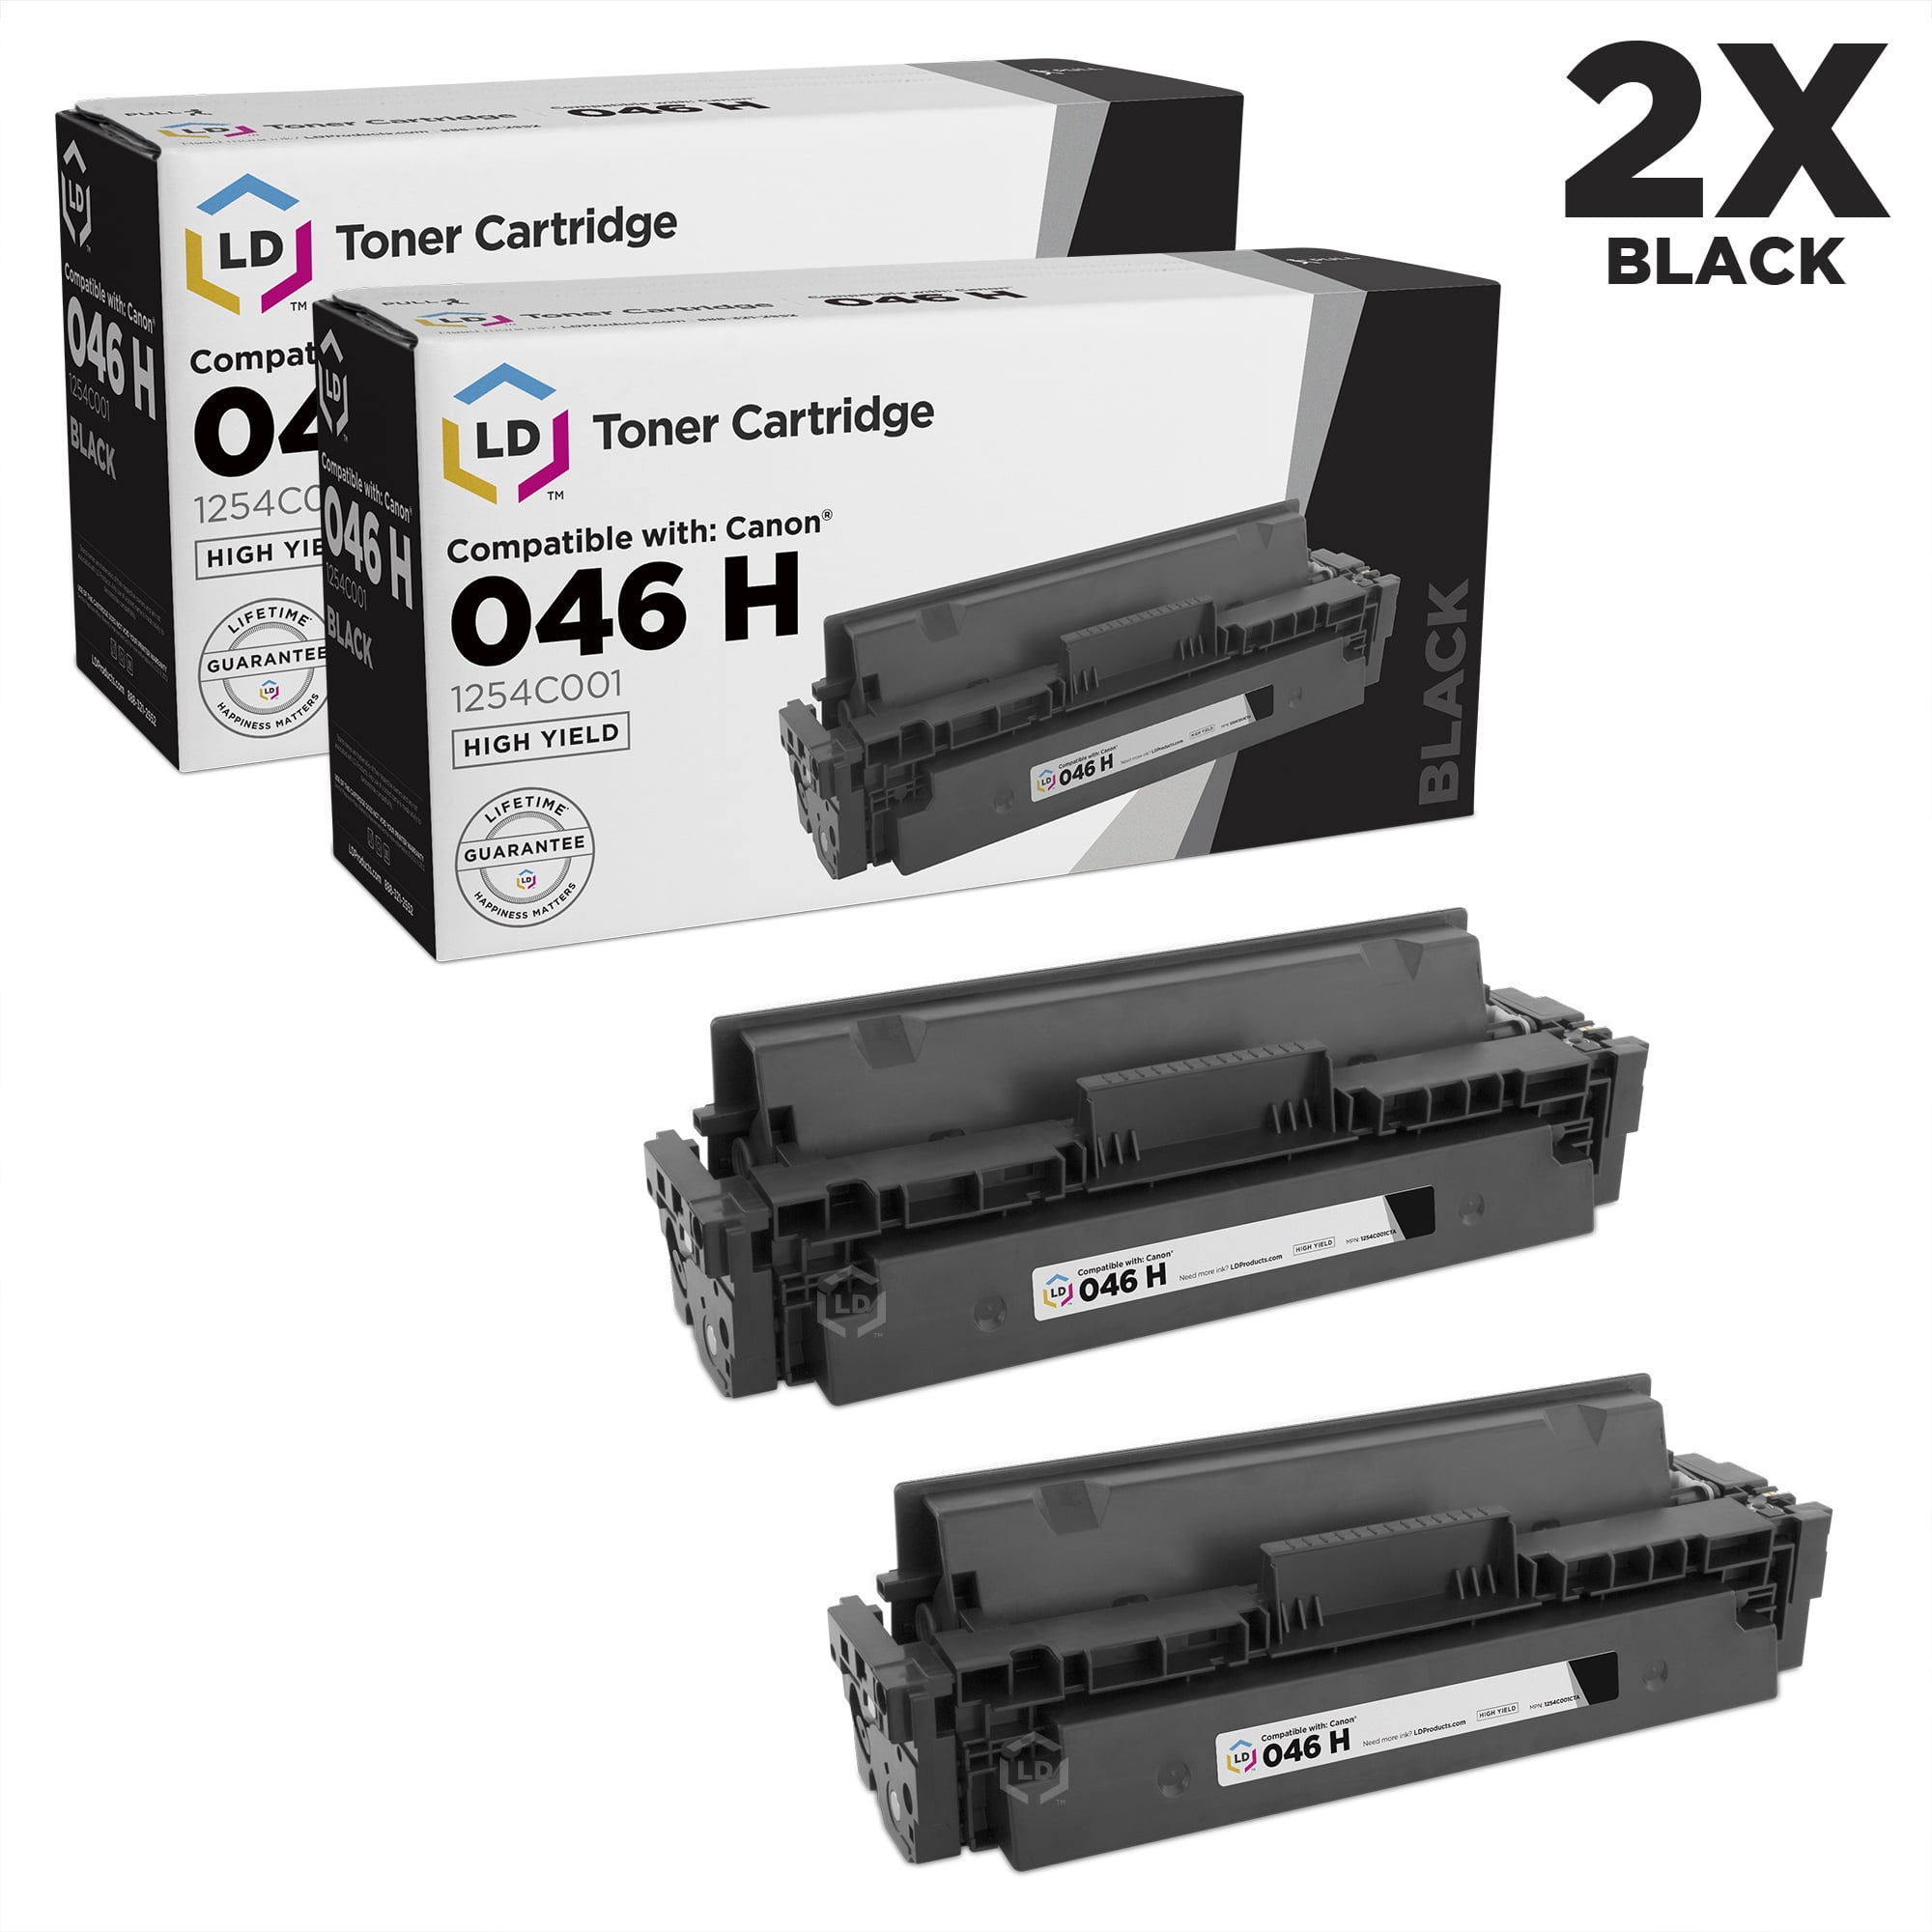 LD Compatible Replacement for Canon 046H 1254C001 High Yield Toner